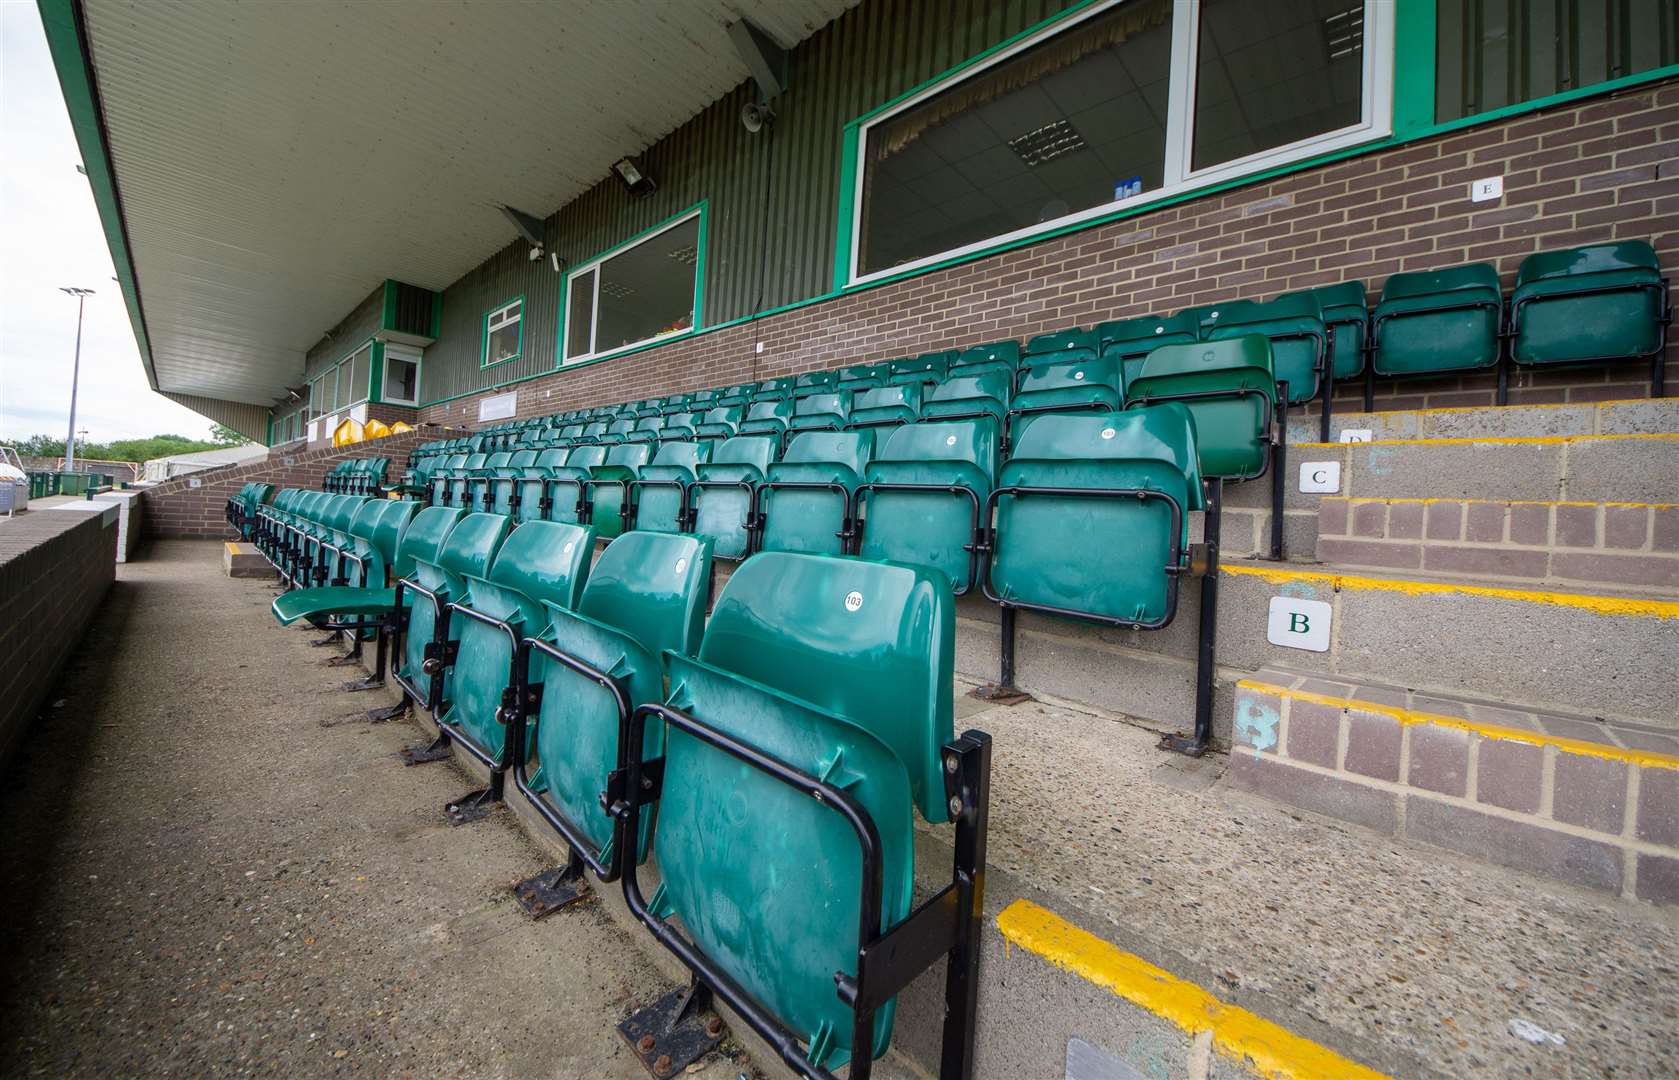 Ashford's Homelands Stadium is out-of-town but a functional venue. Picture: Ian Scammell